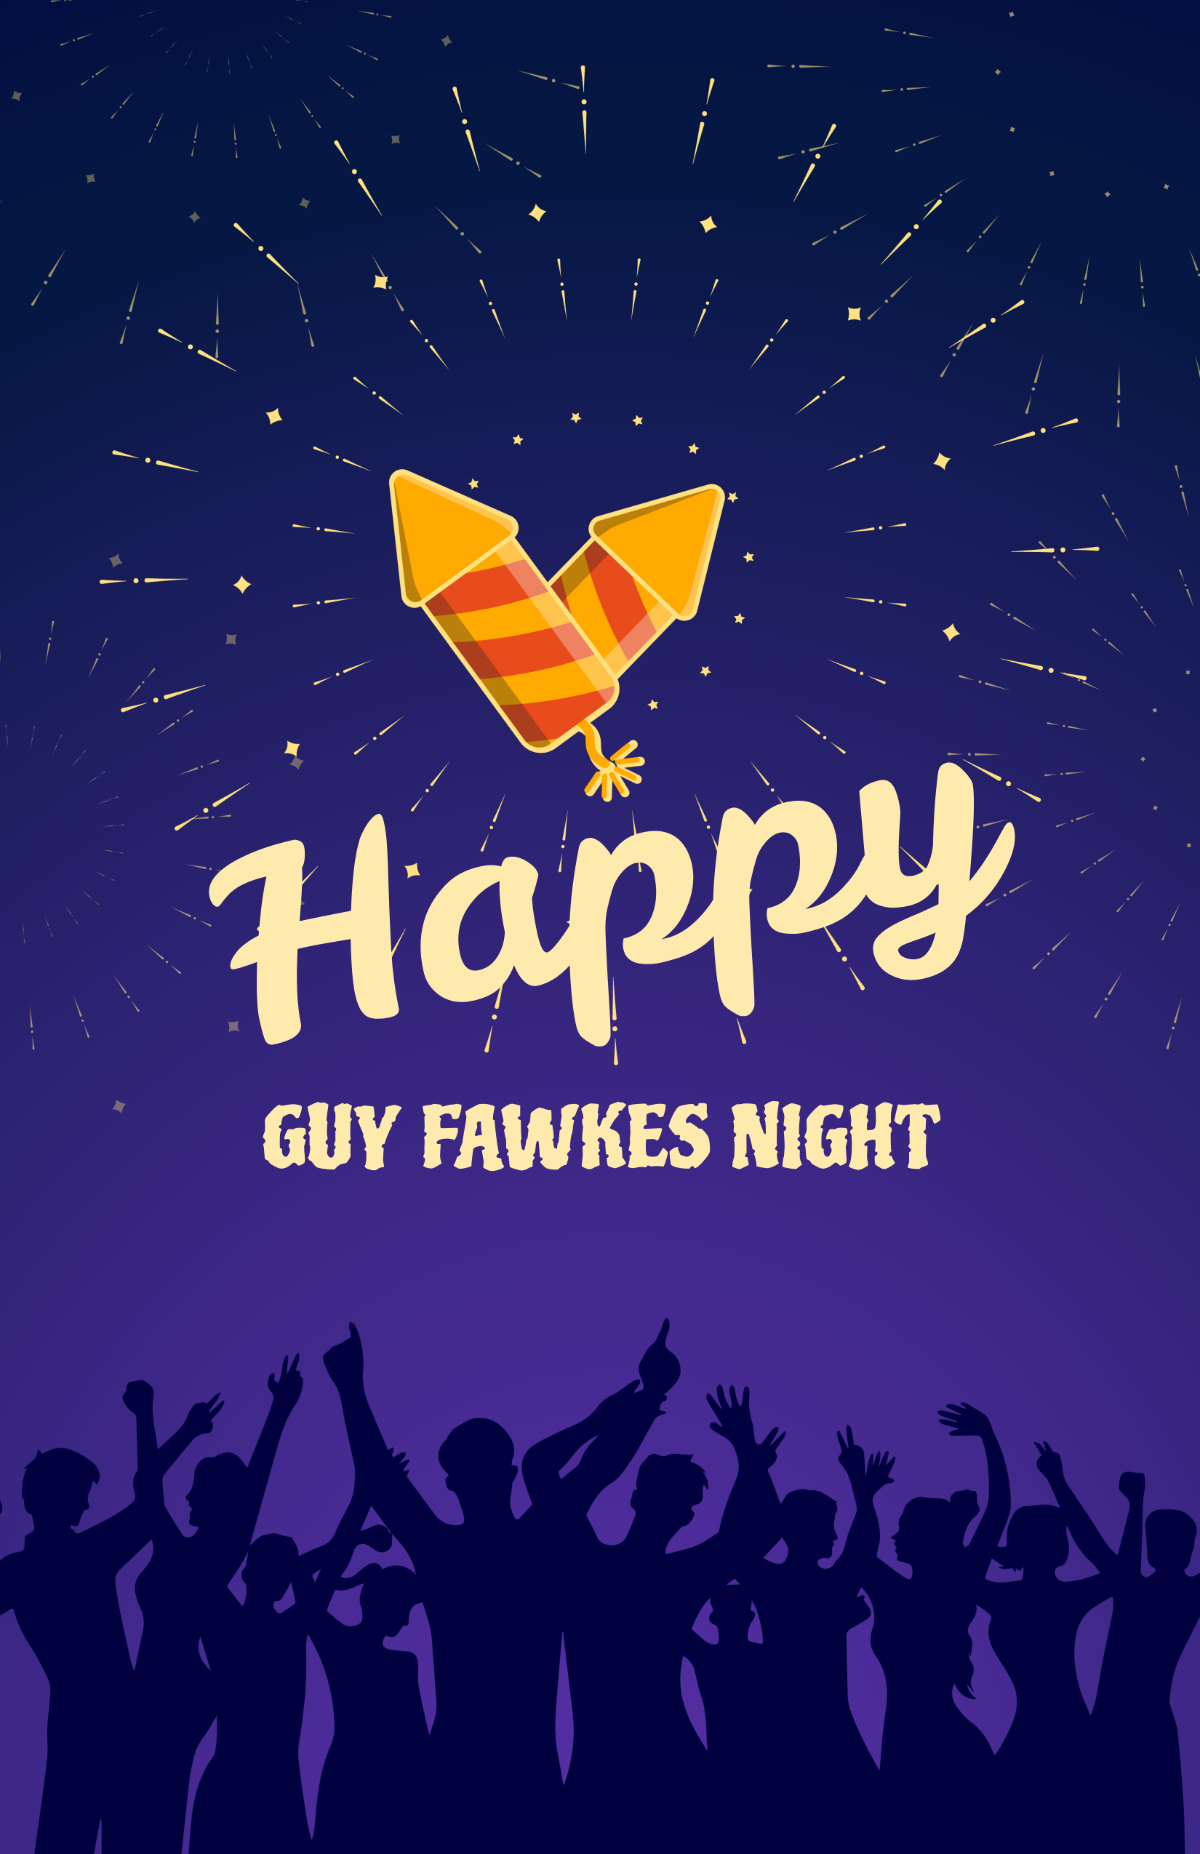 Free Guy Fawkes Night Poster Template